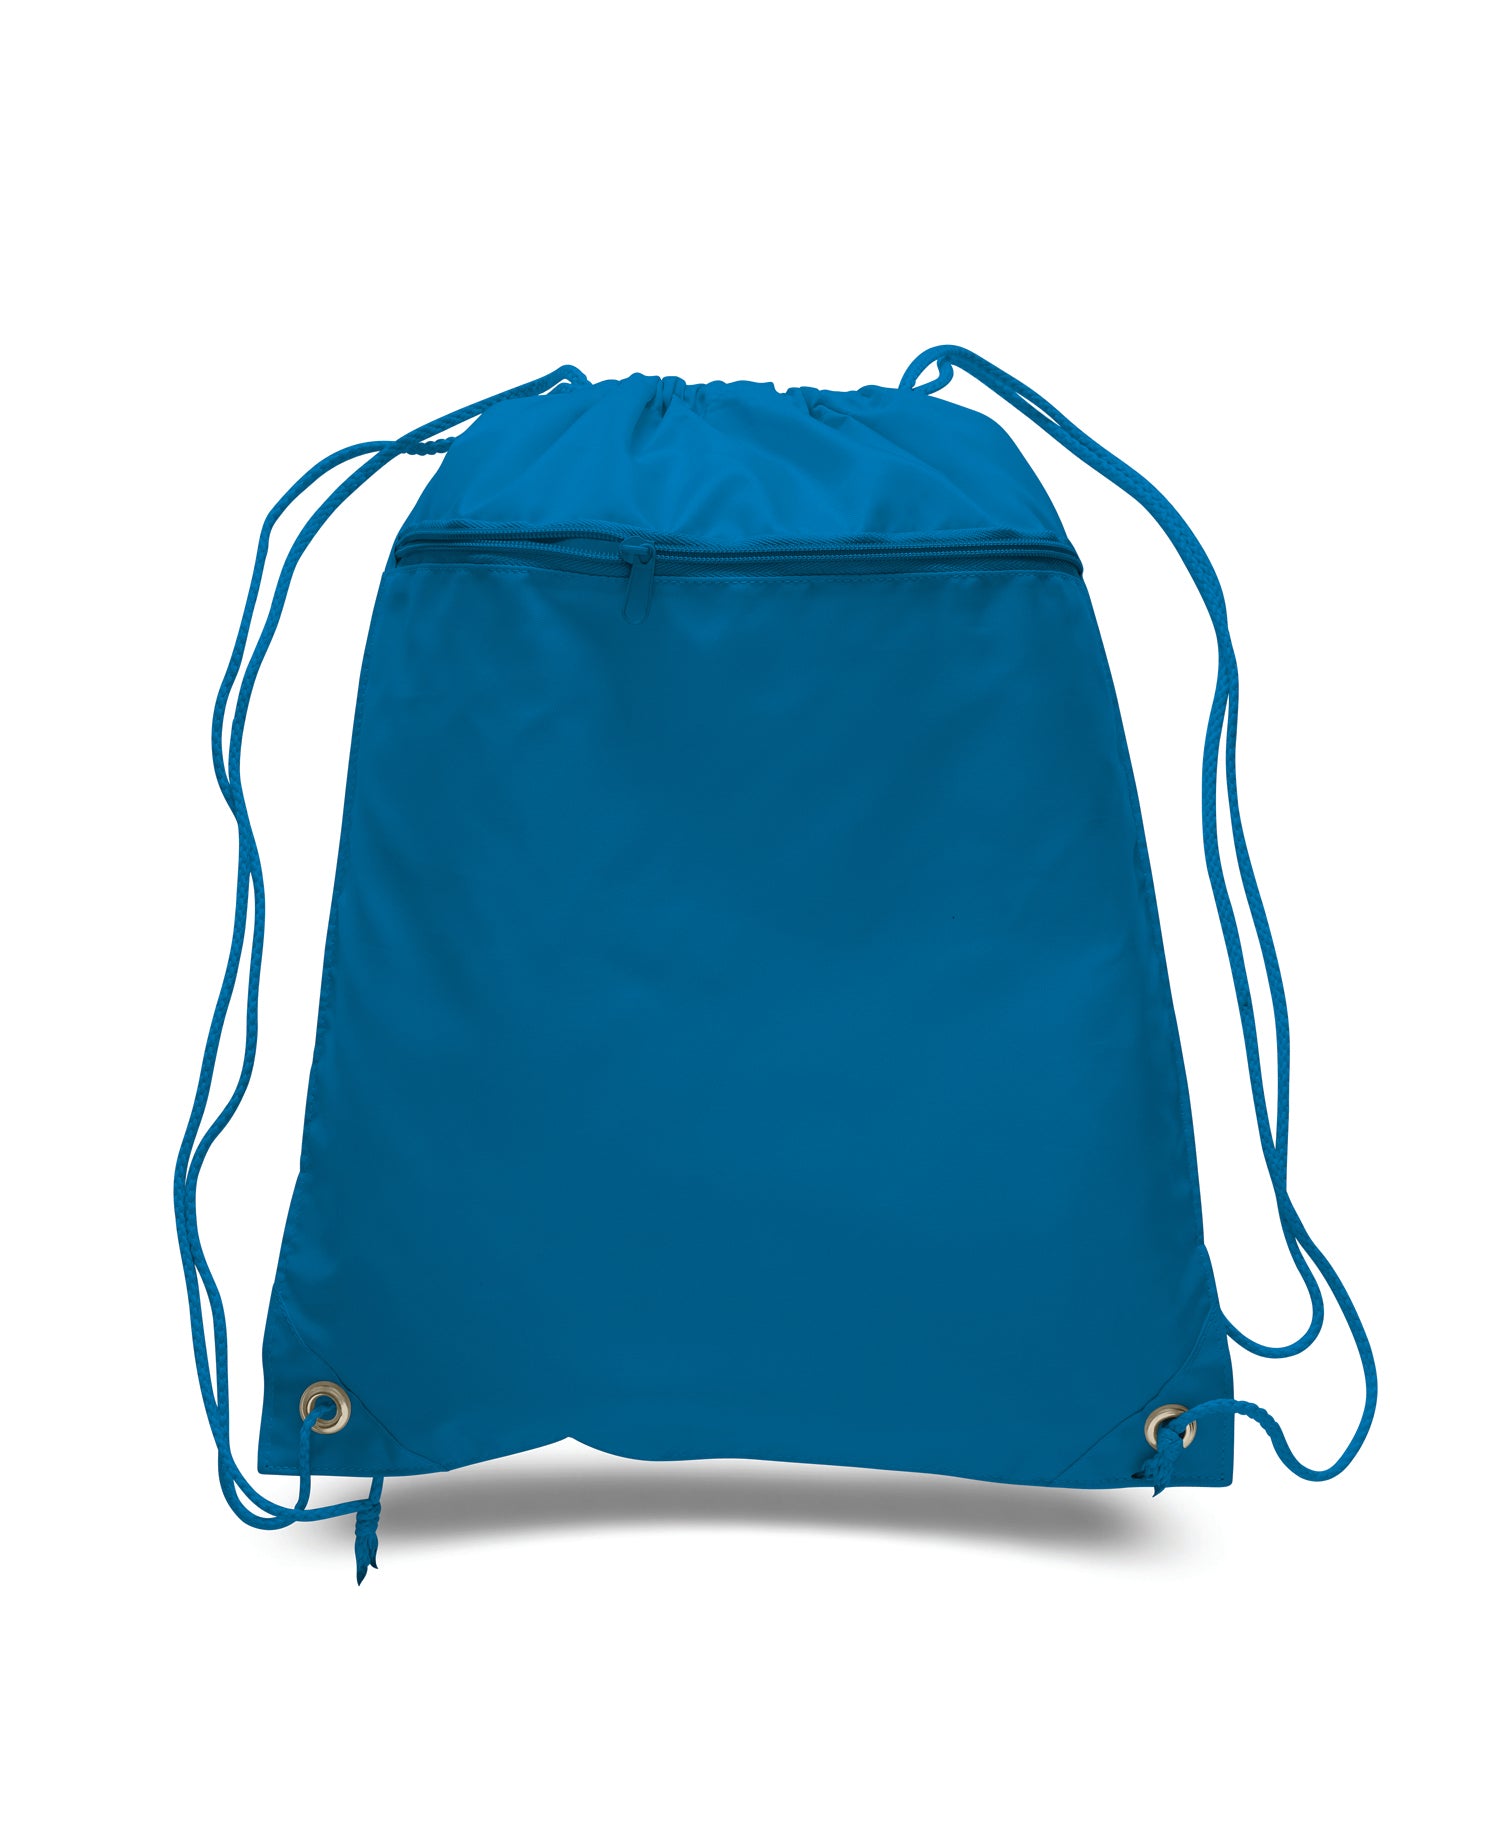 Giveaway Backpack-600 D Poly-Royal Blue/Graphite-USA Made by Unionwear